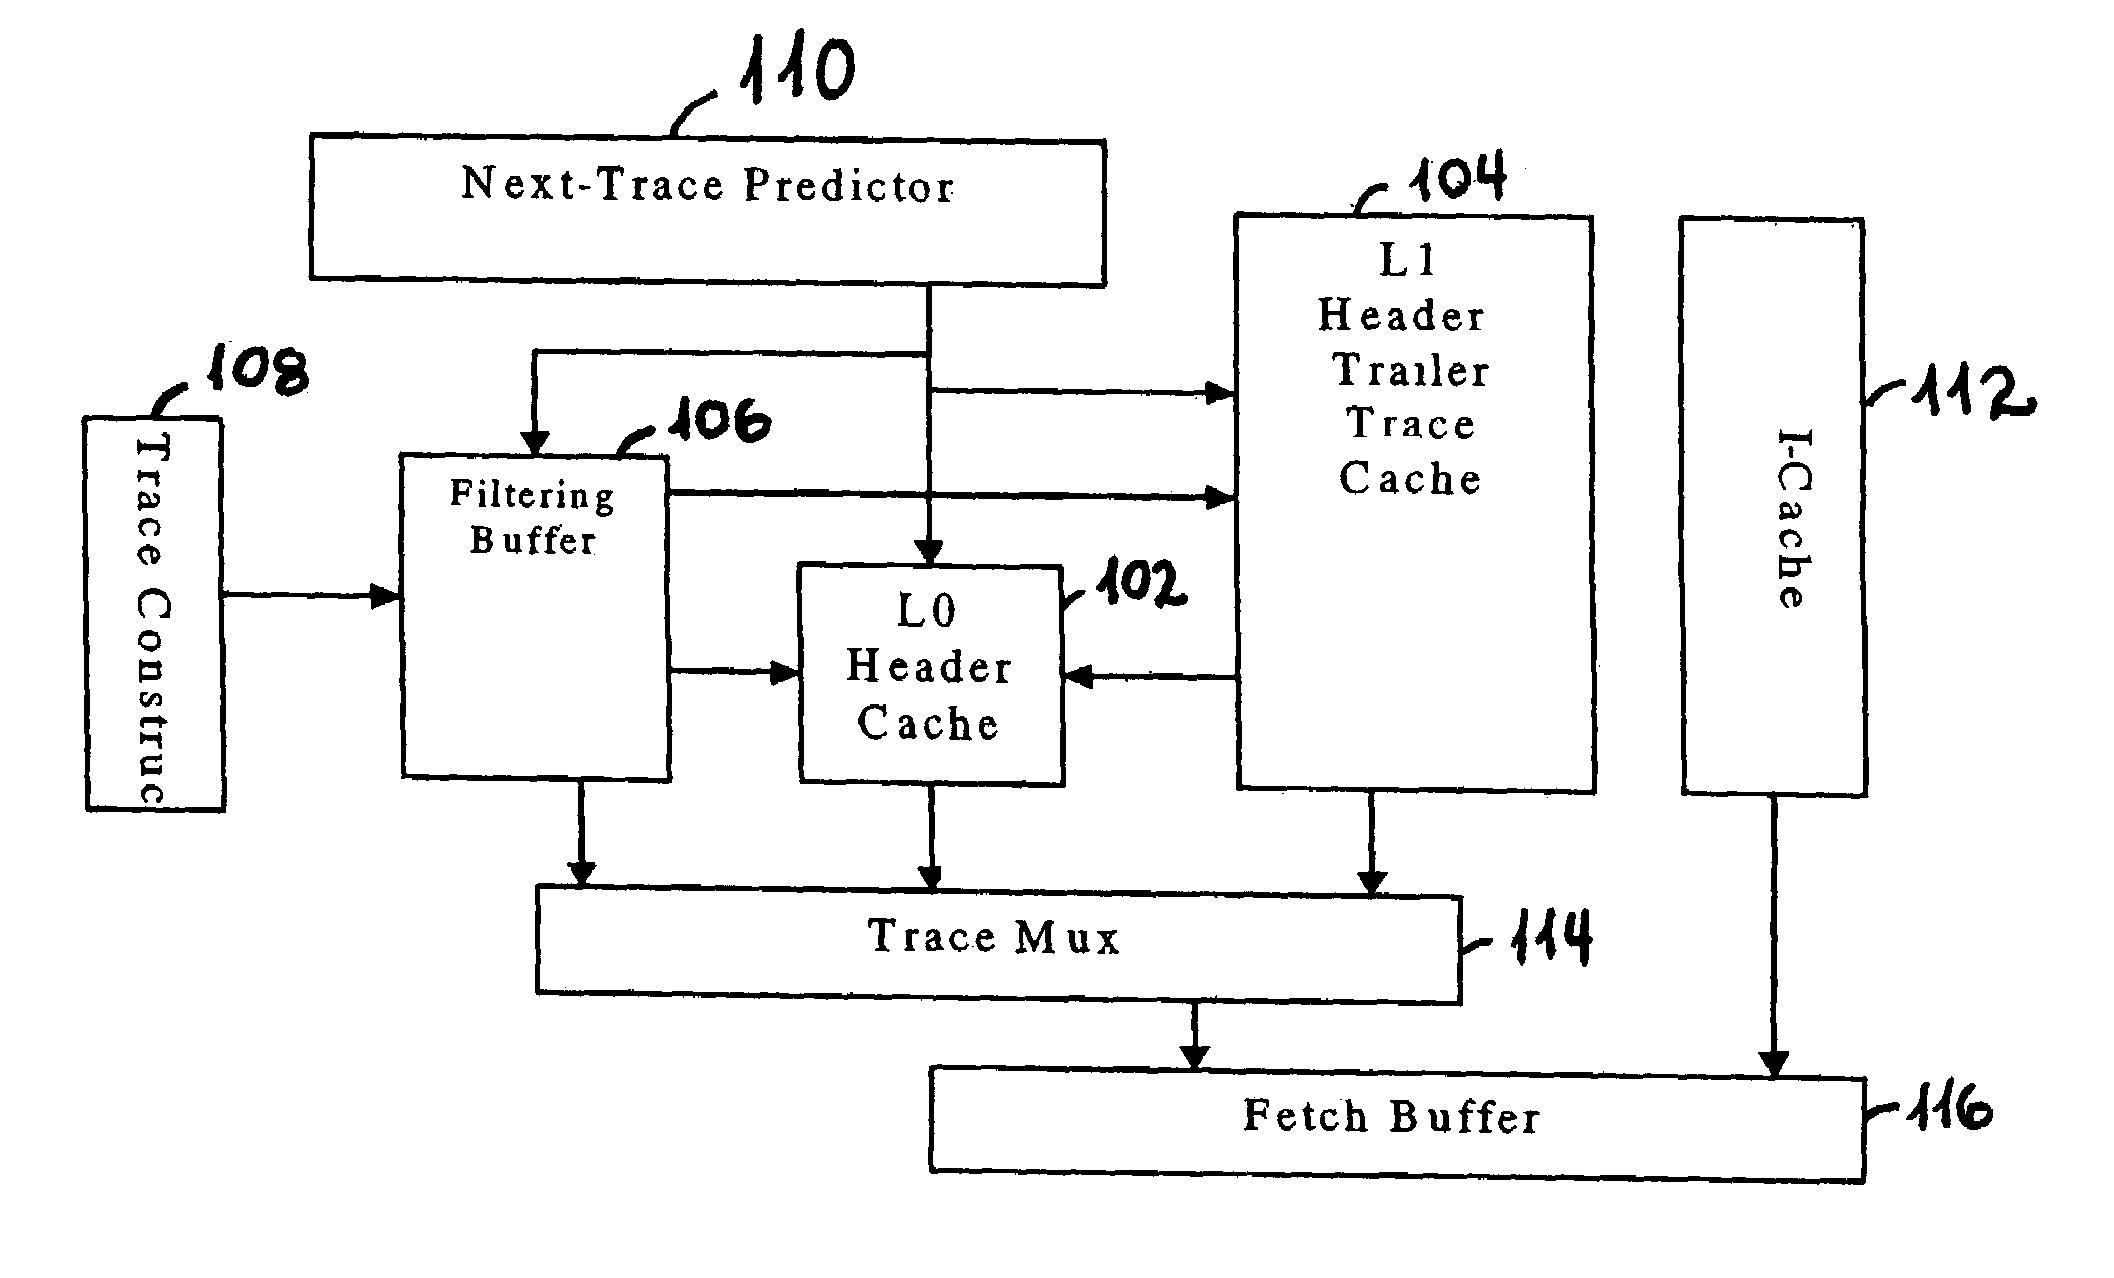 Method and apparatus for an efficient multi-path trace cache design